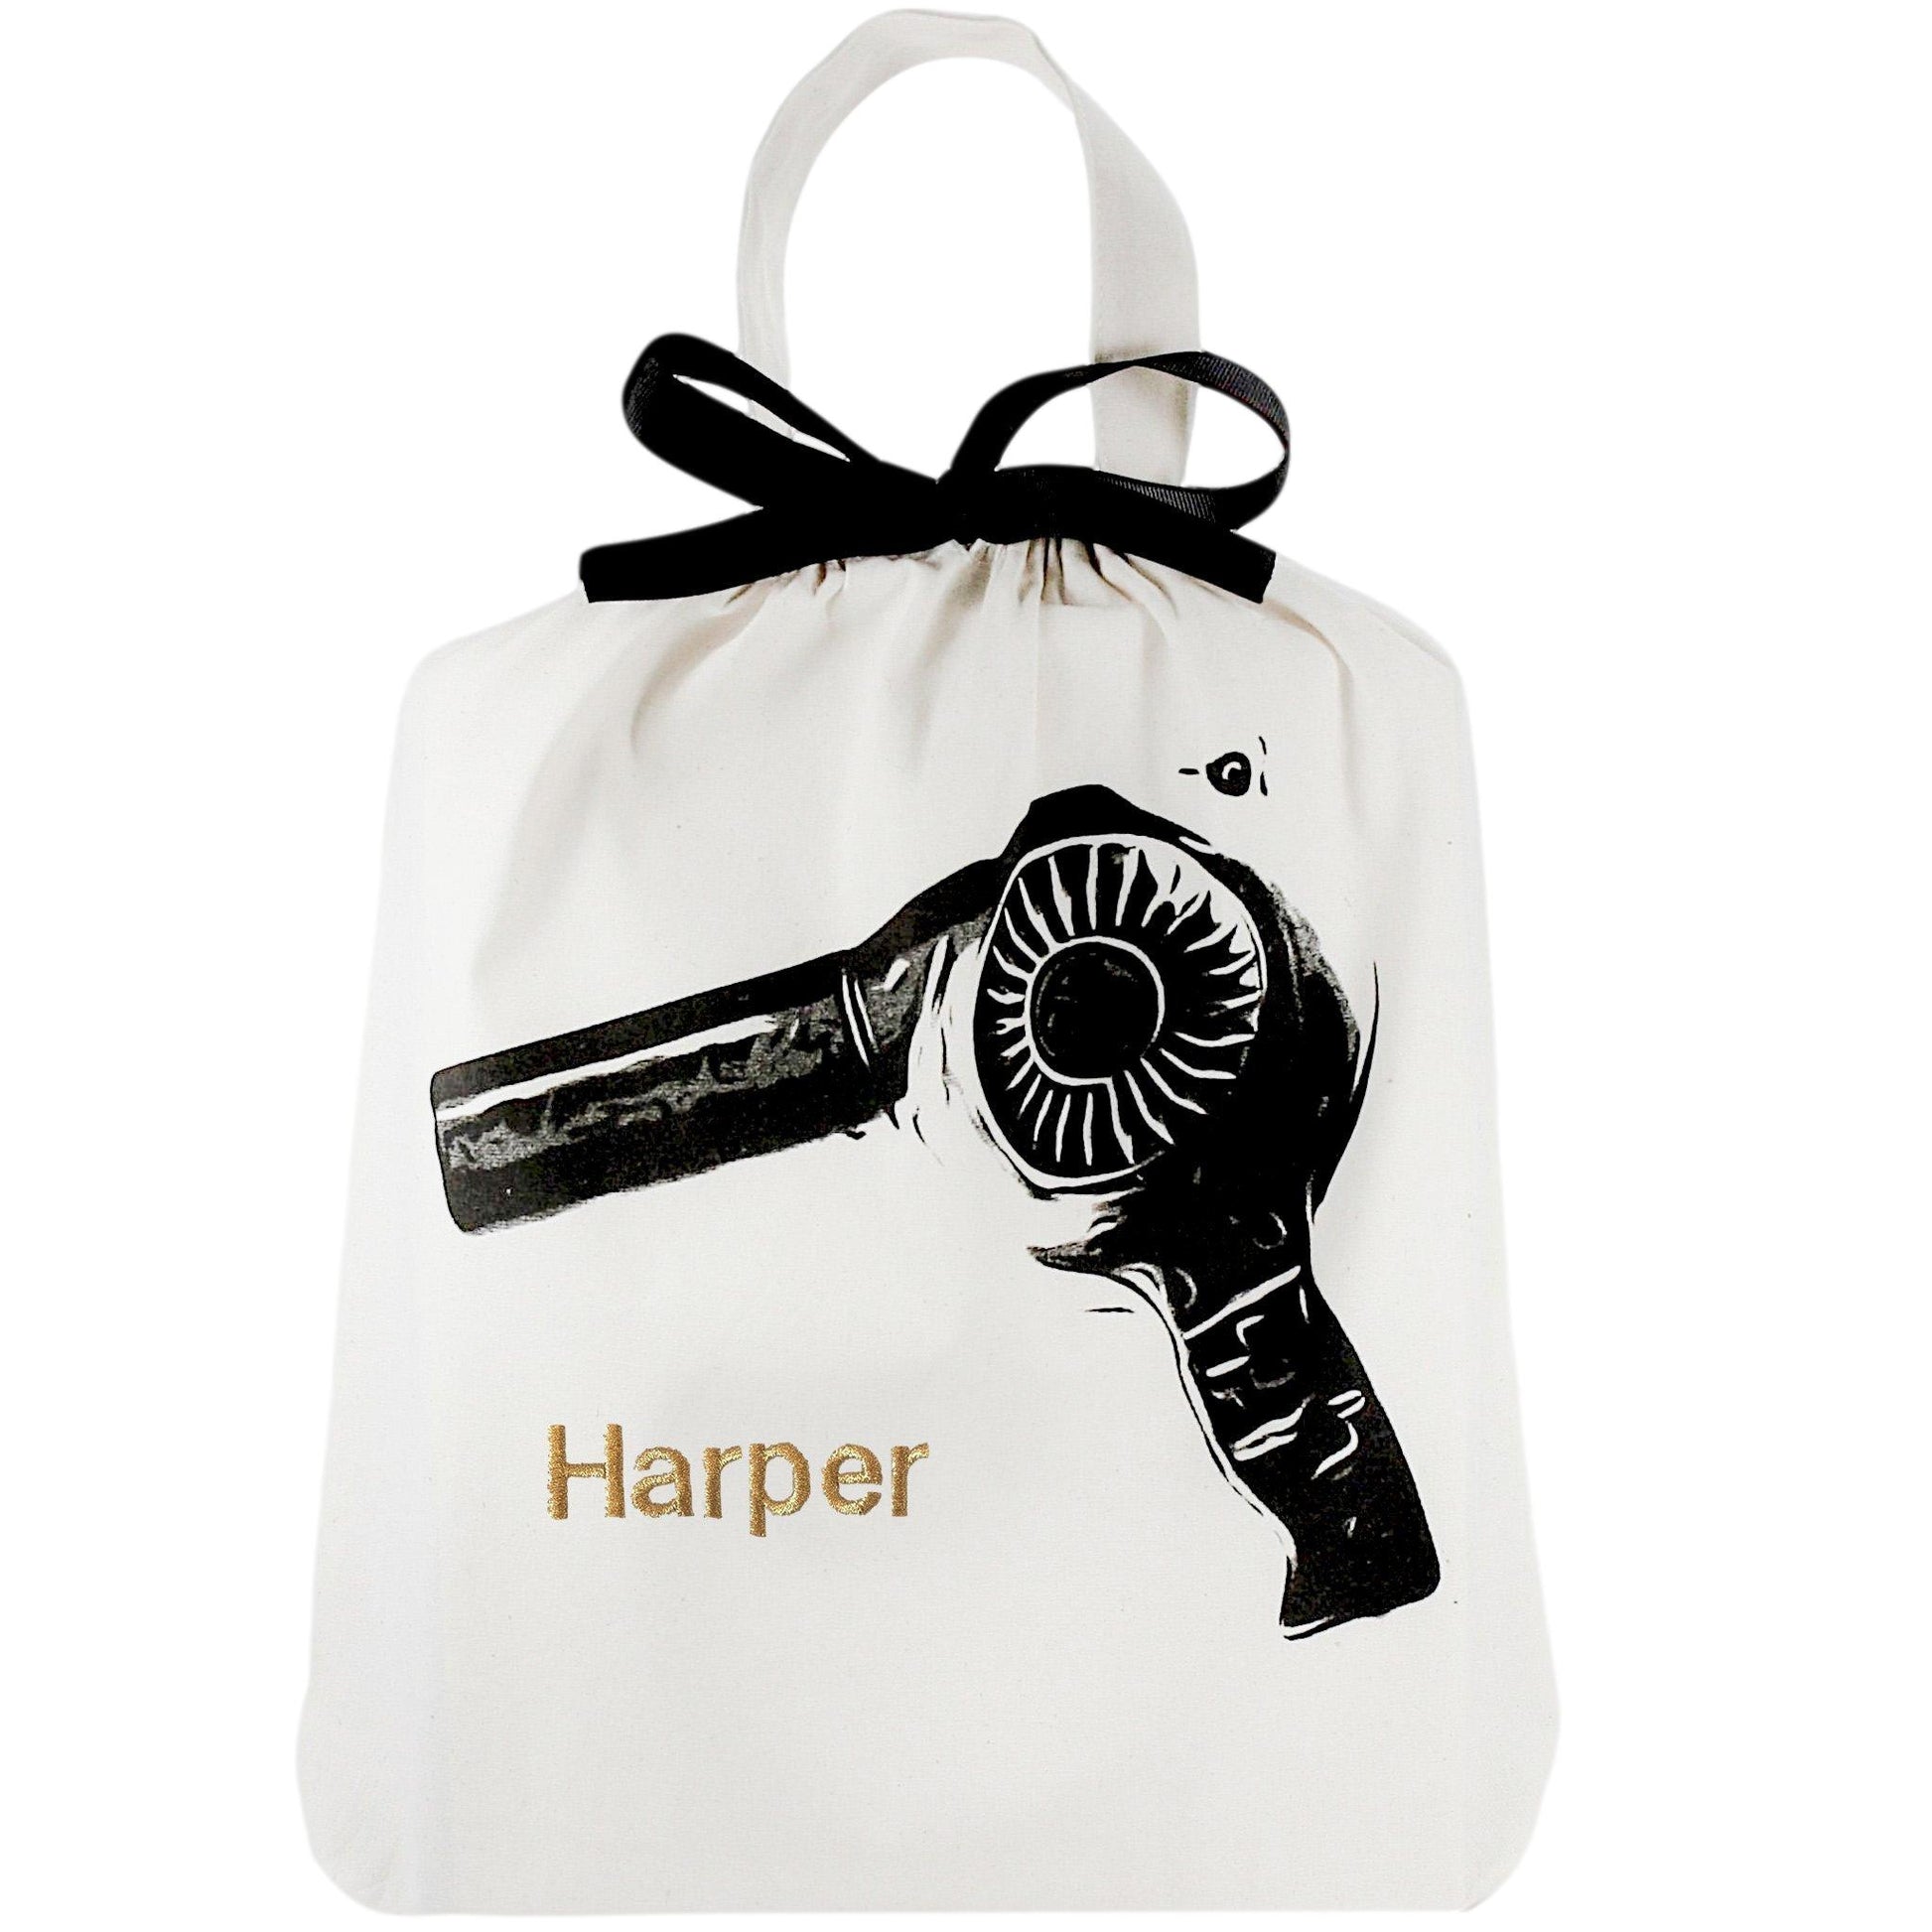 Hairdryer bag for your hairdryer with "harper" personalized on the front. 